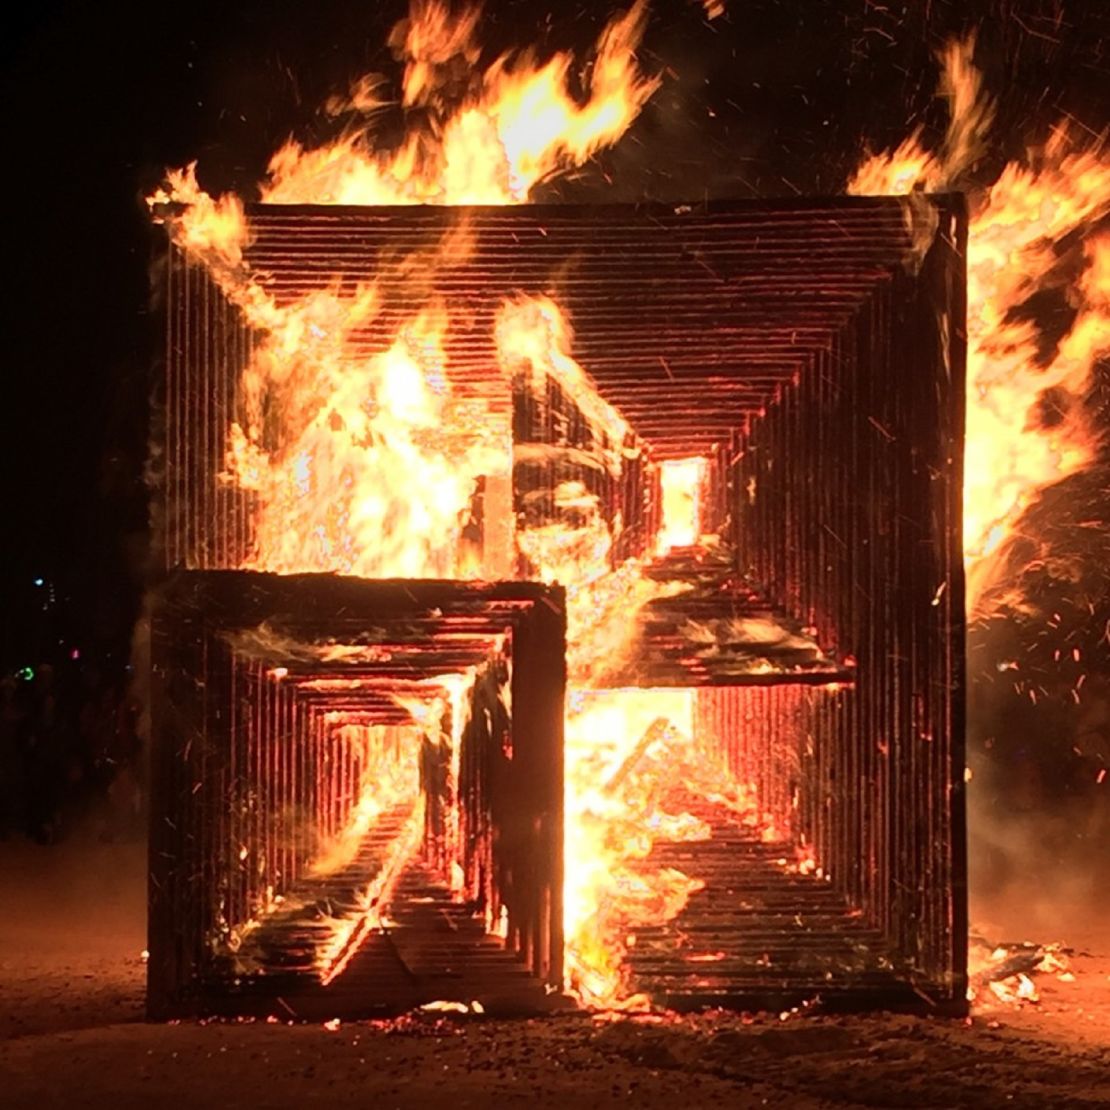 Bismuth Bivouac alight at Burning Man 2015. Design by Jonathan Leung, a student of Toby Burgess and Arthur Mamou-Mani from University of Westminster.